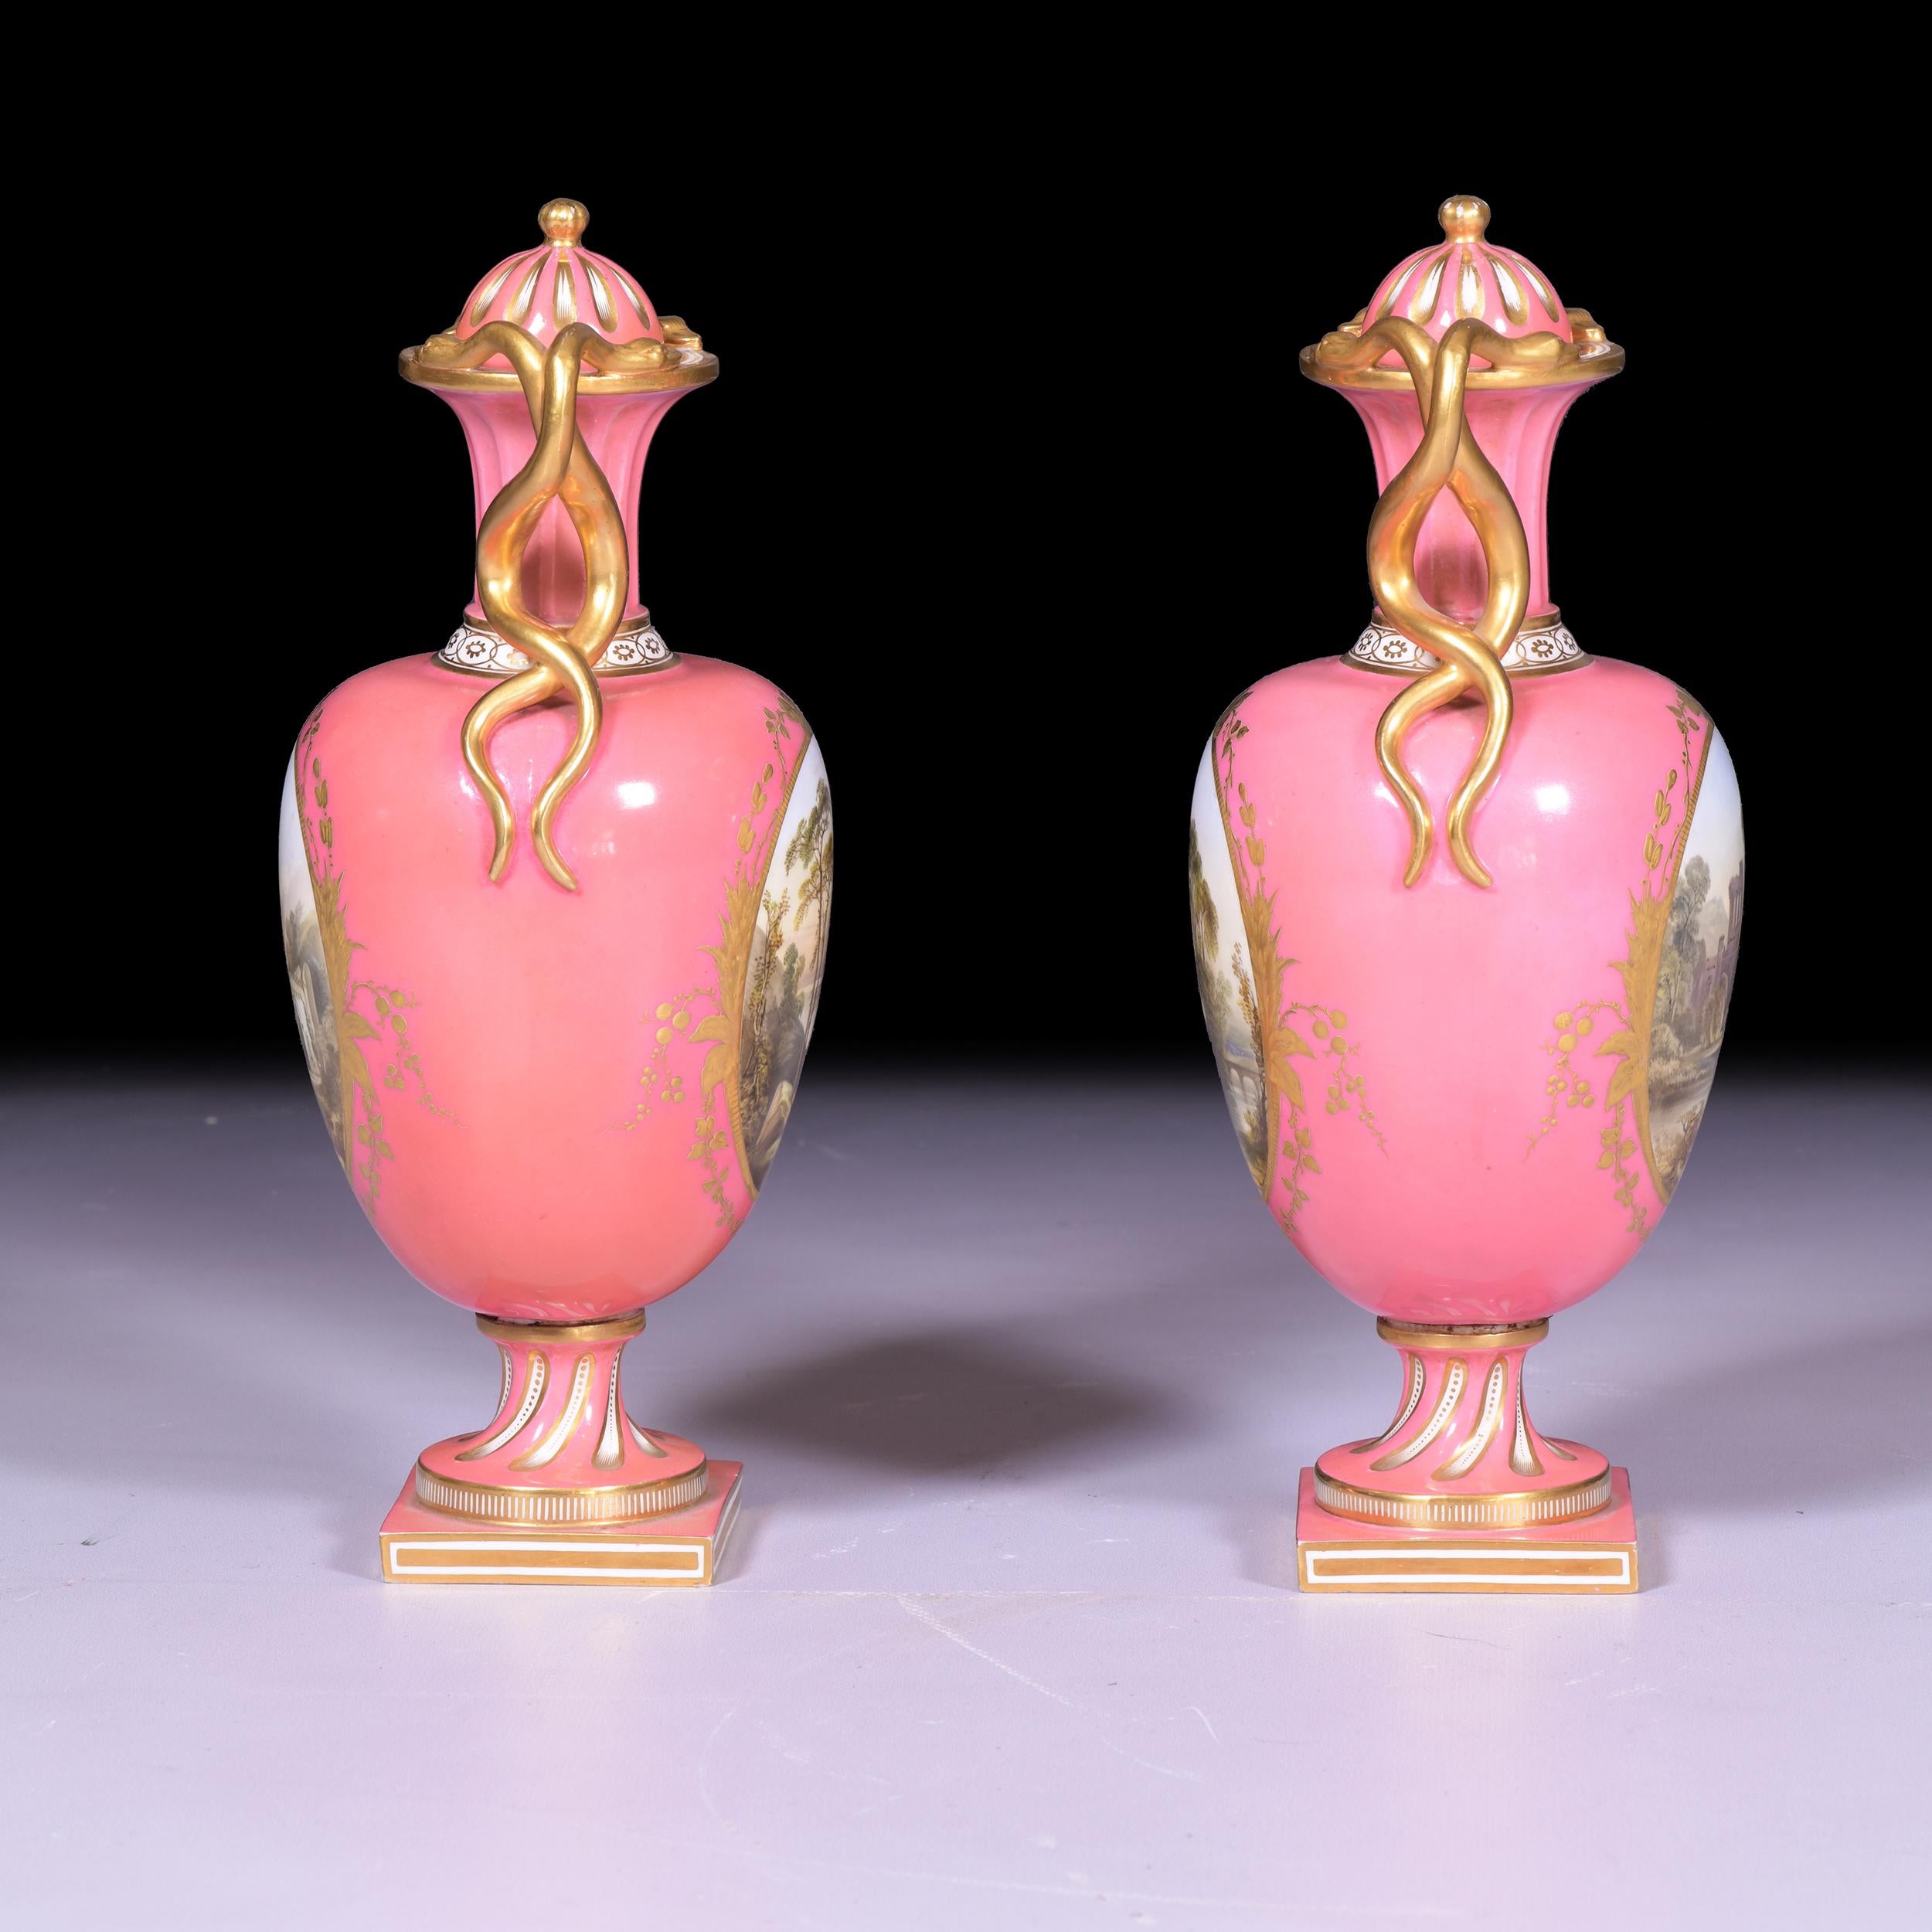 Pair of 19th Century English Porcelain Vases & Covers by Coalport In Good Condition For Sale In Dublin, IE